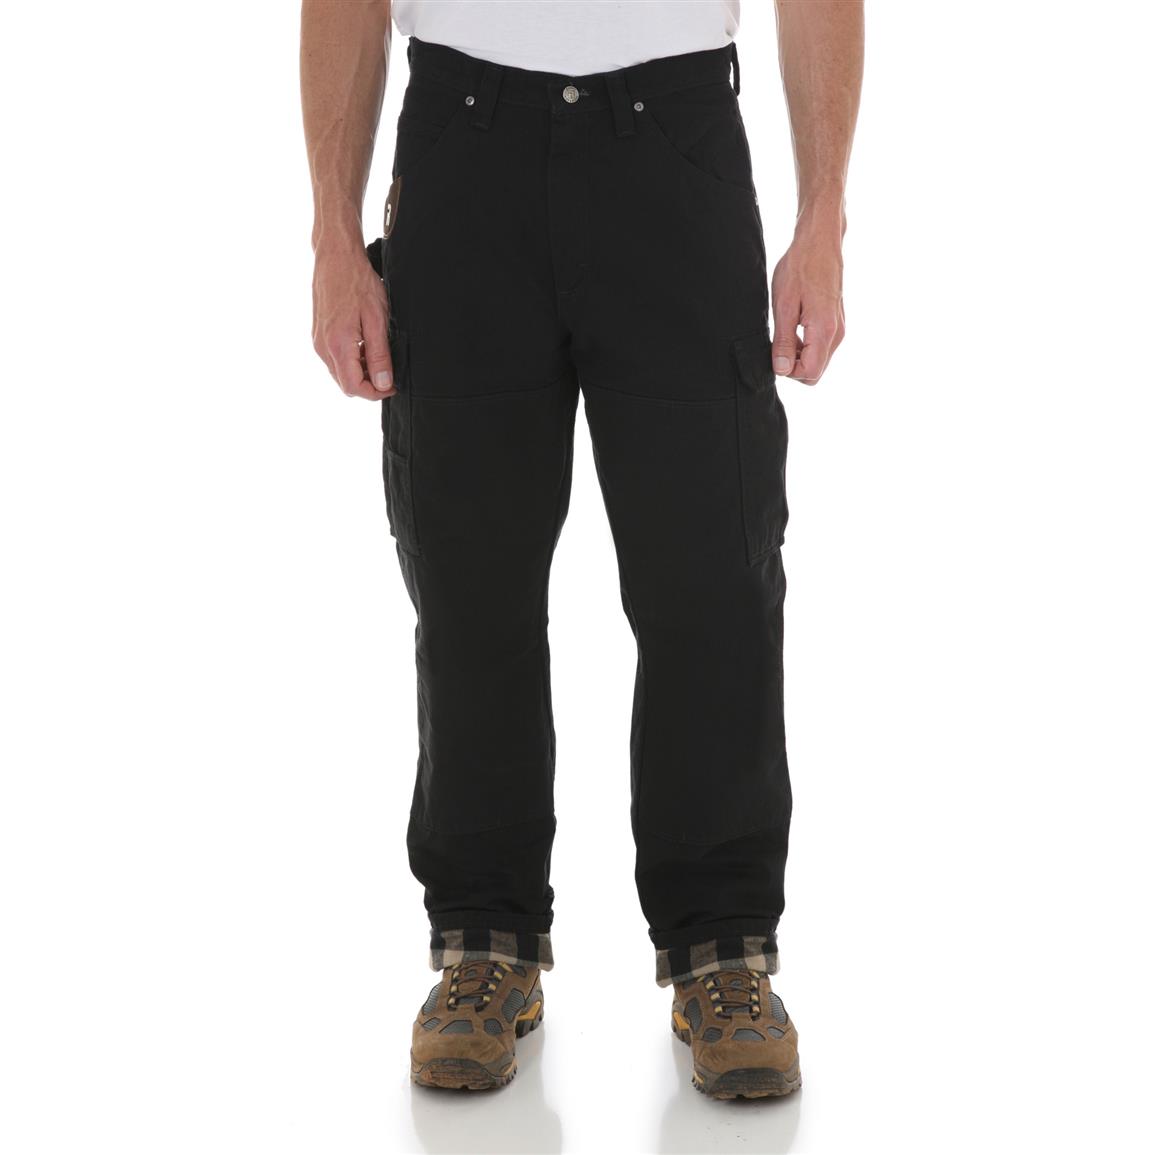 wrangler riggs lined pants